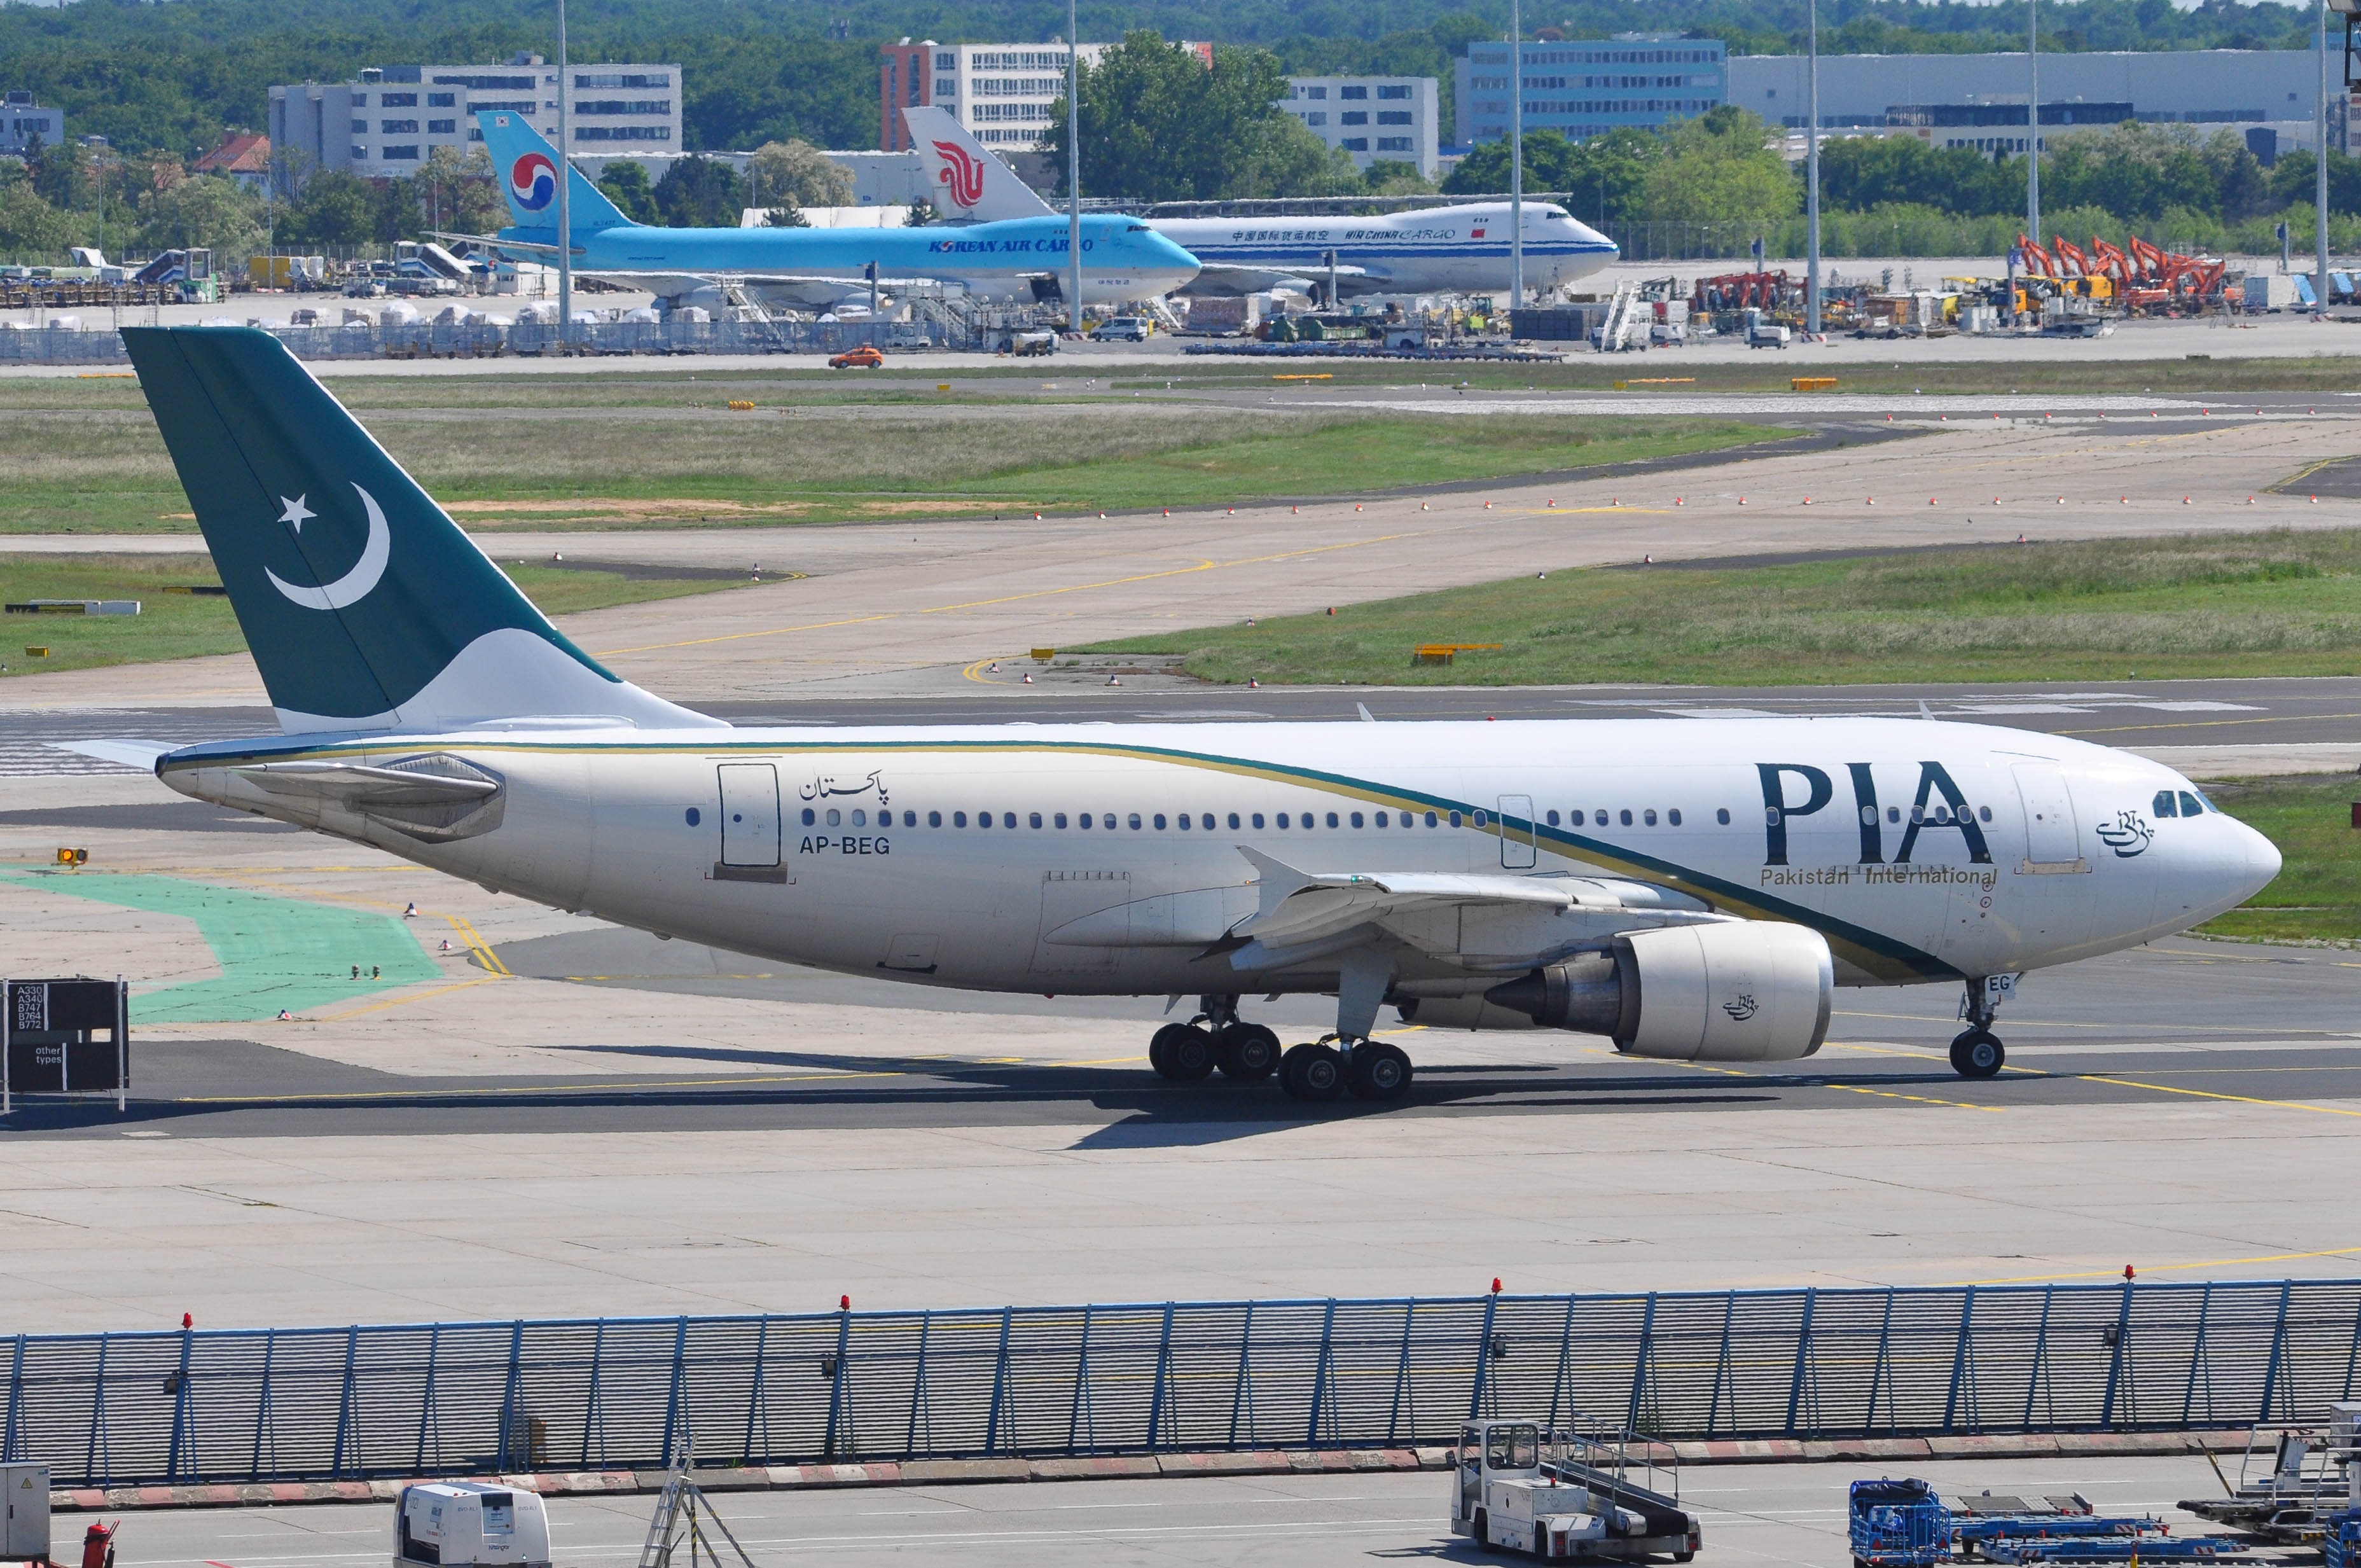 AP-BEG/APBEG Pakistan International Airlines Airbus A310-308 Photo by colinw - AVSpotters.com